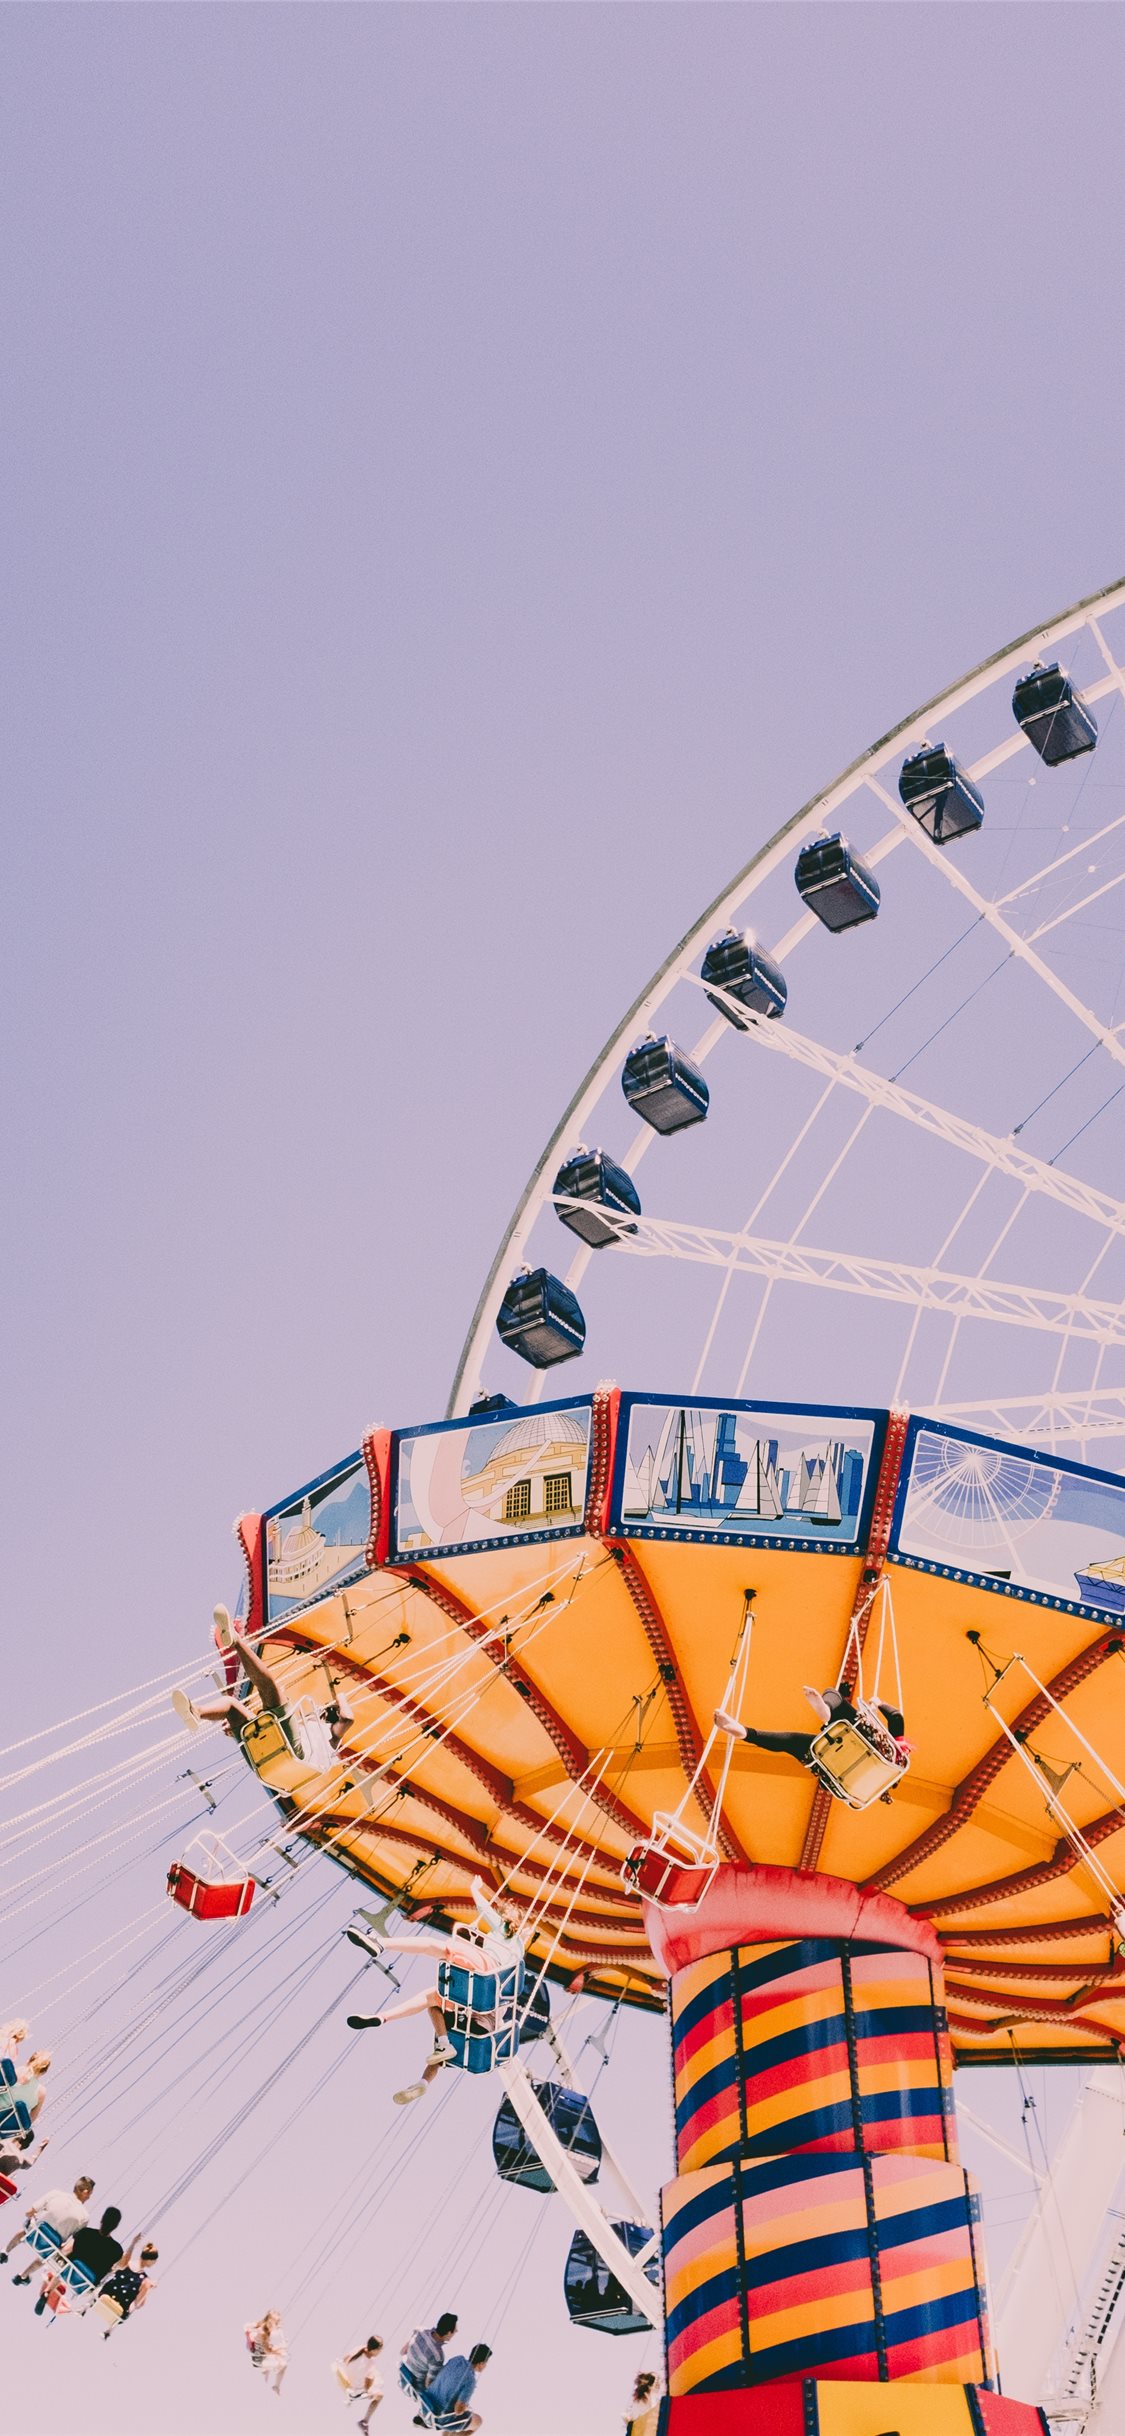 Navy Pier Chicago United States iPhone Wallpaper